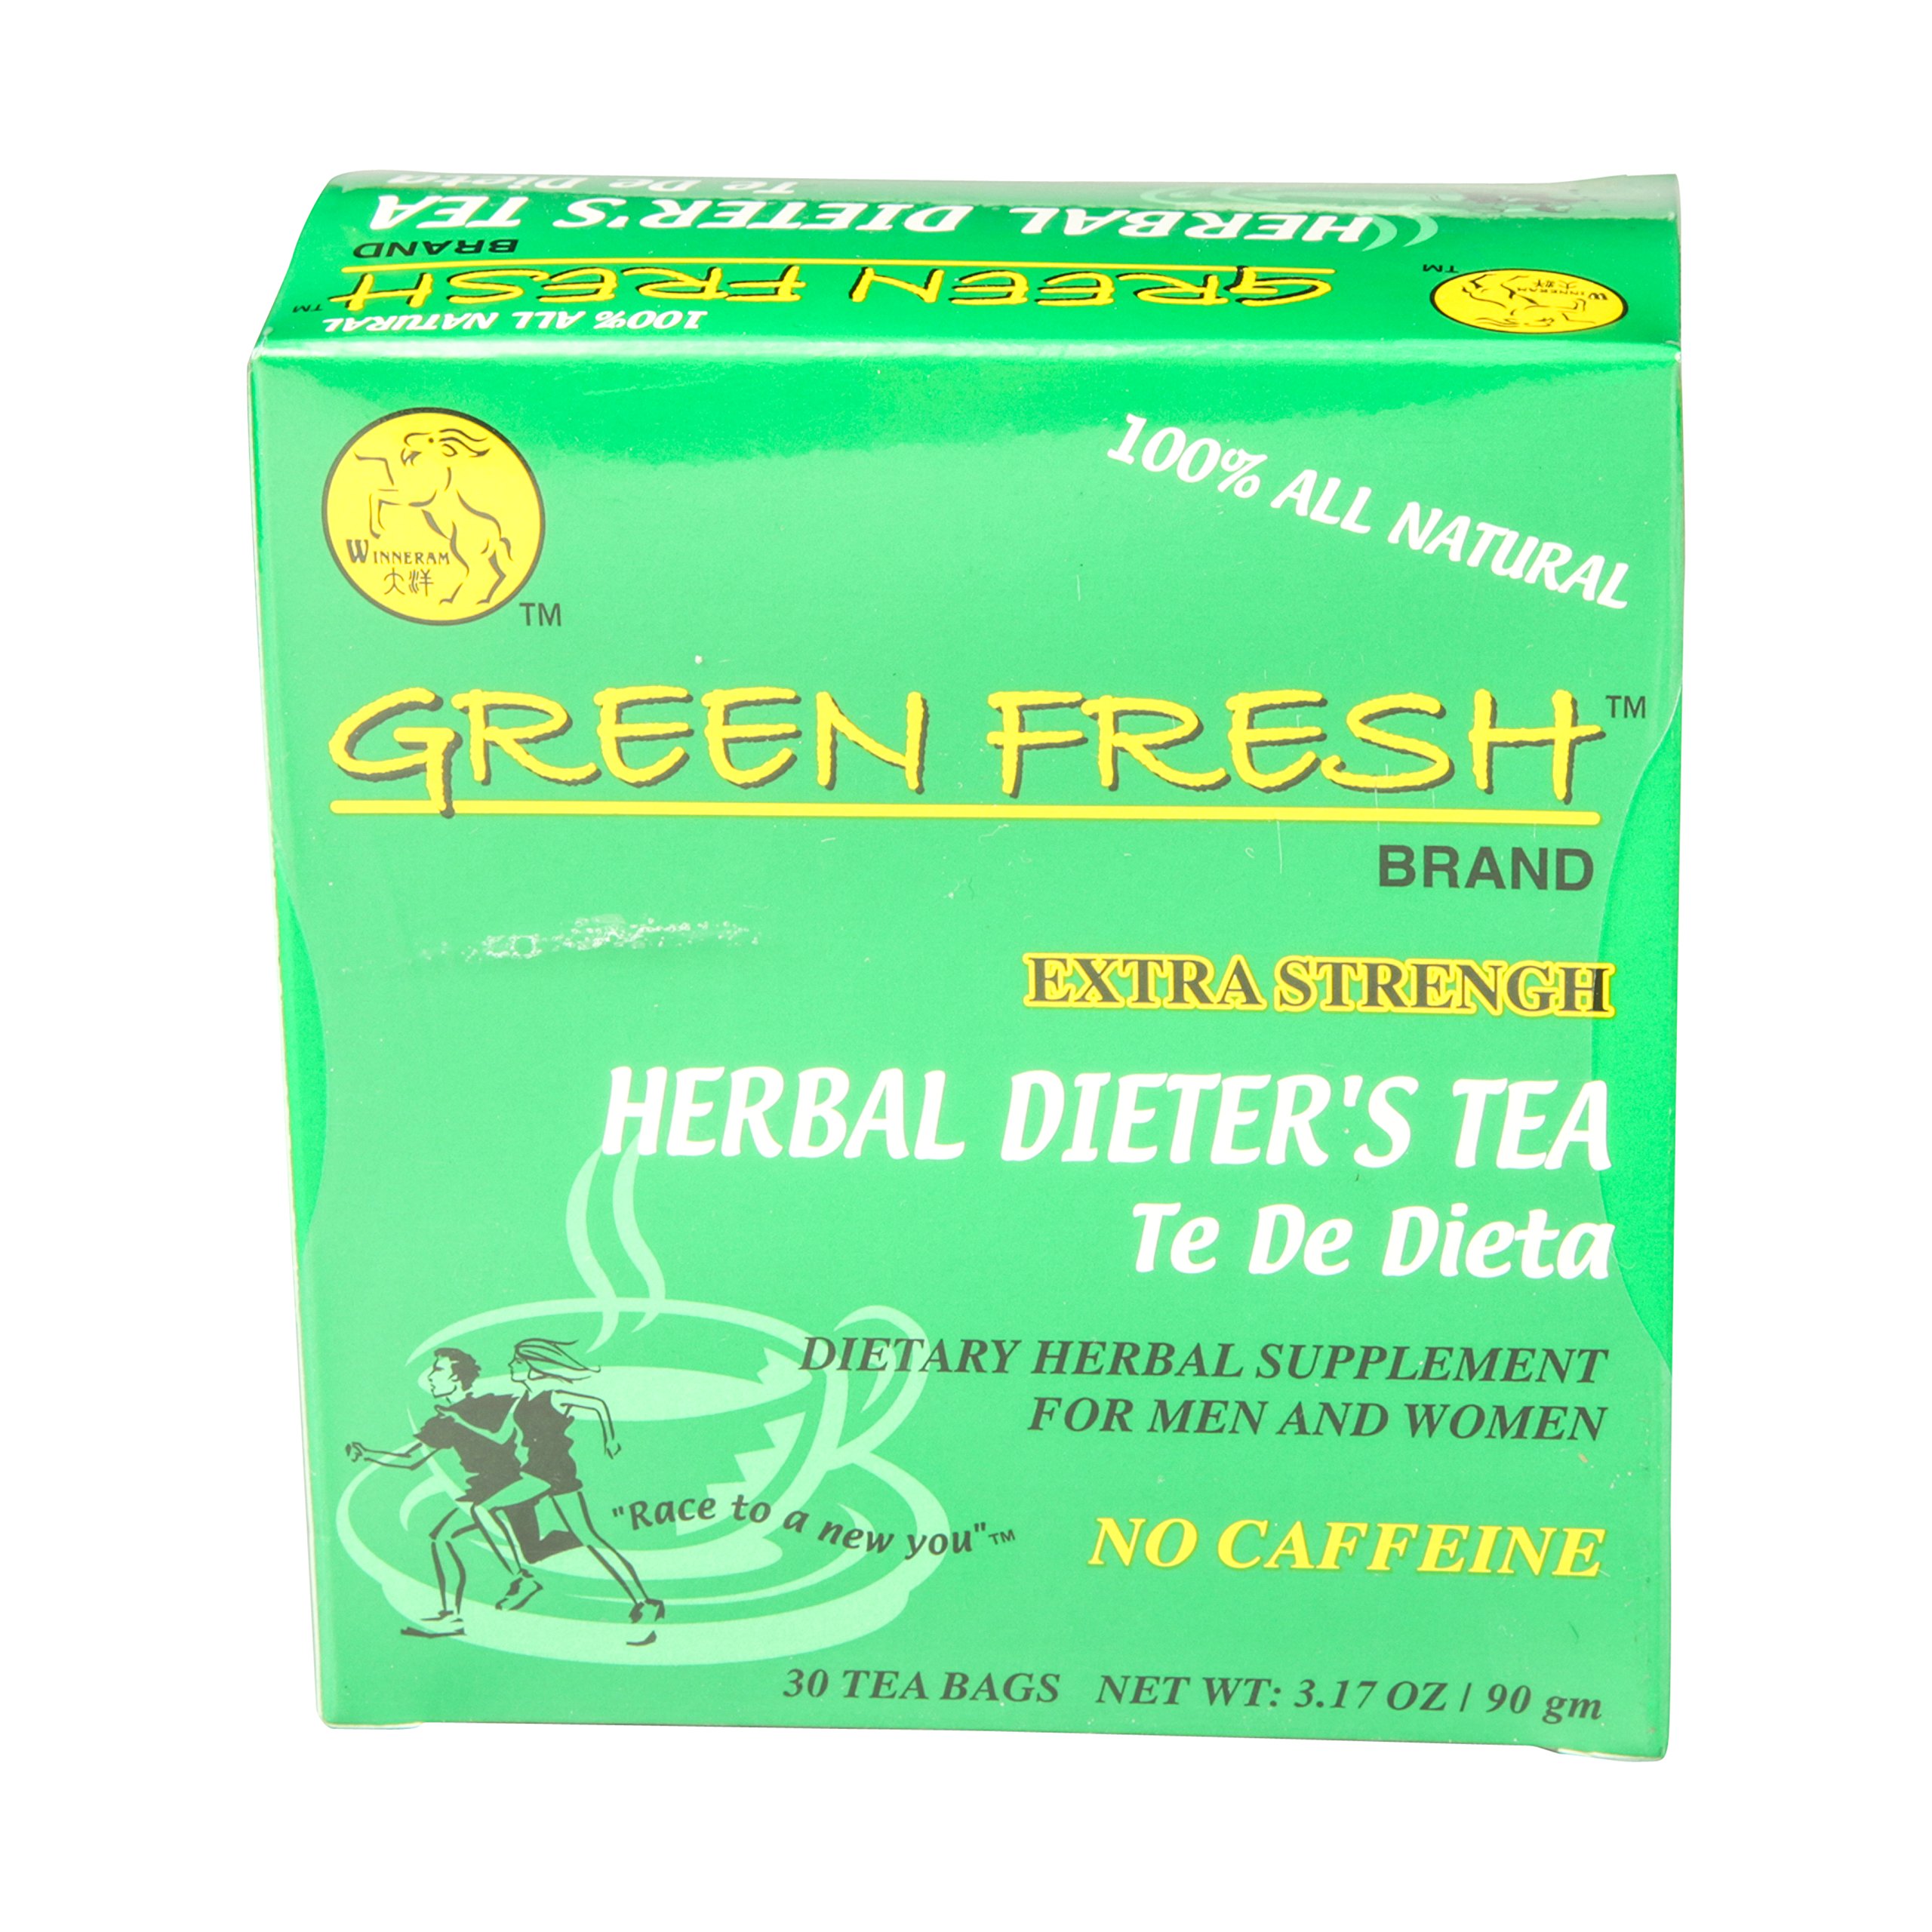 Green Fresh Extra Strength Herbal Dieters Tea (30 Count), 2.11 Ounces